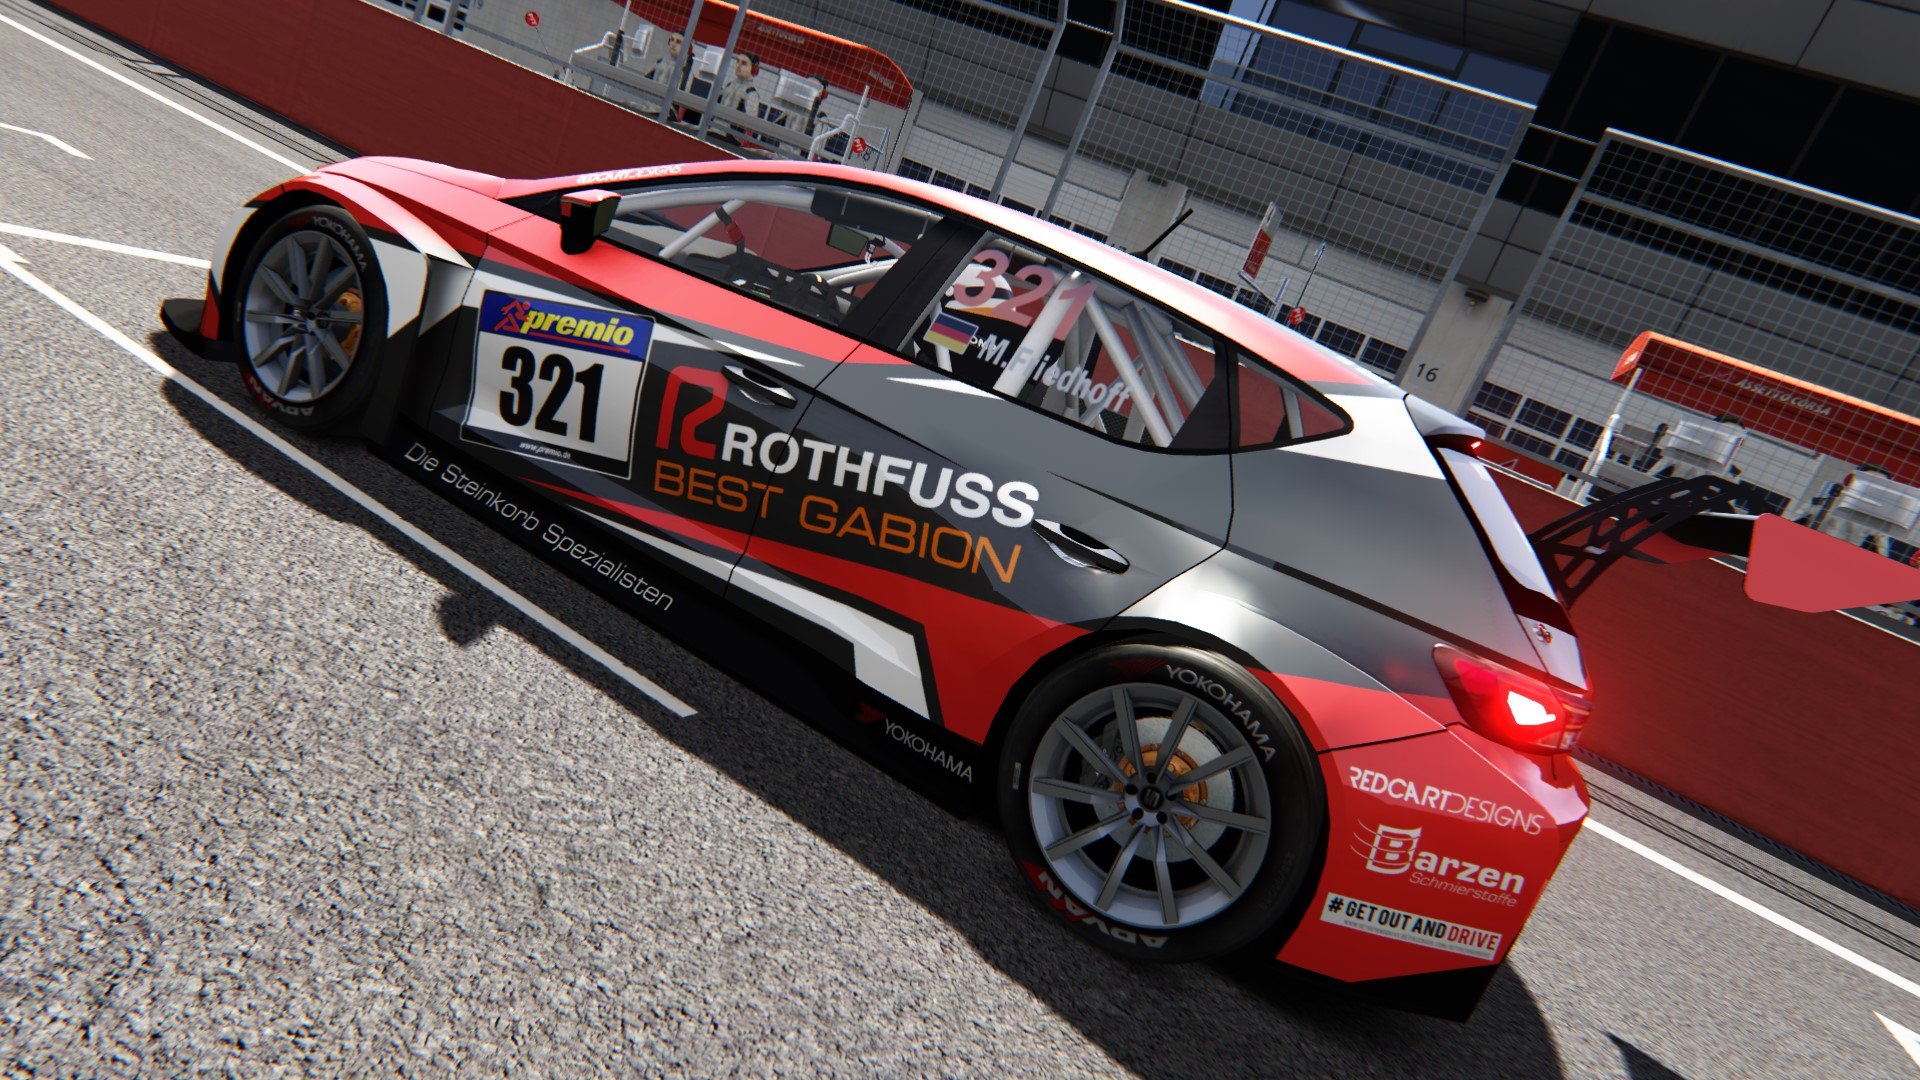 More information about "Assetto Corsa: Seat Leon TCR 2018 v1.6 by Shaun Clarke"